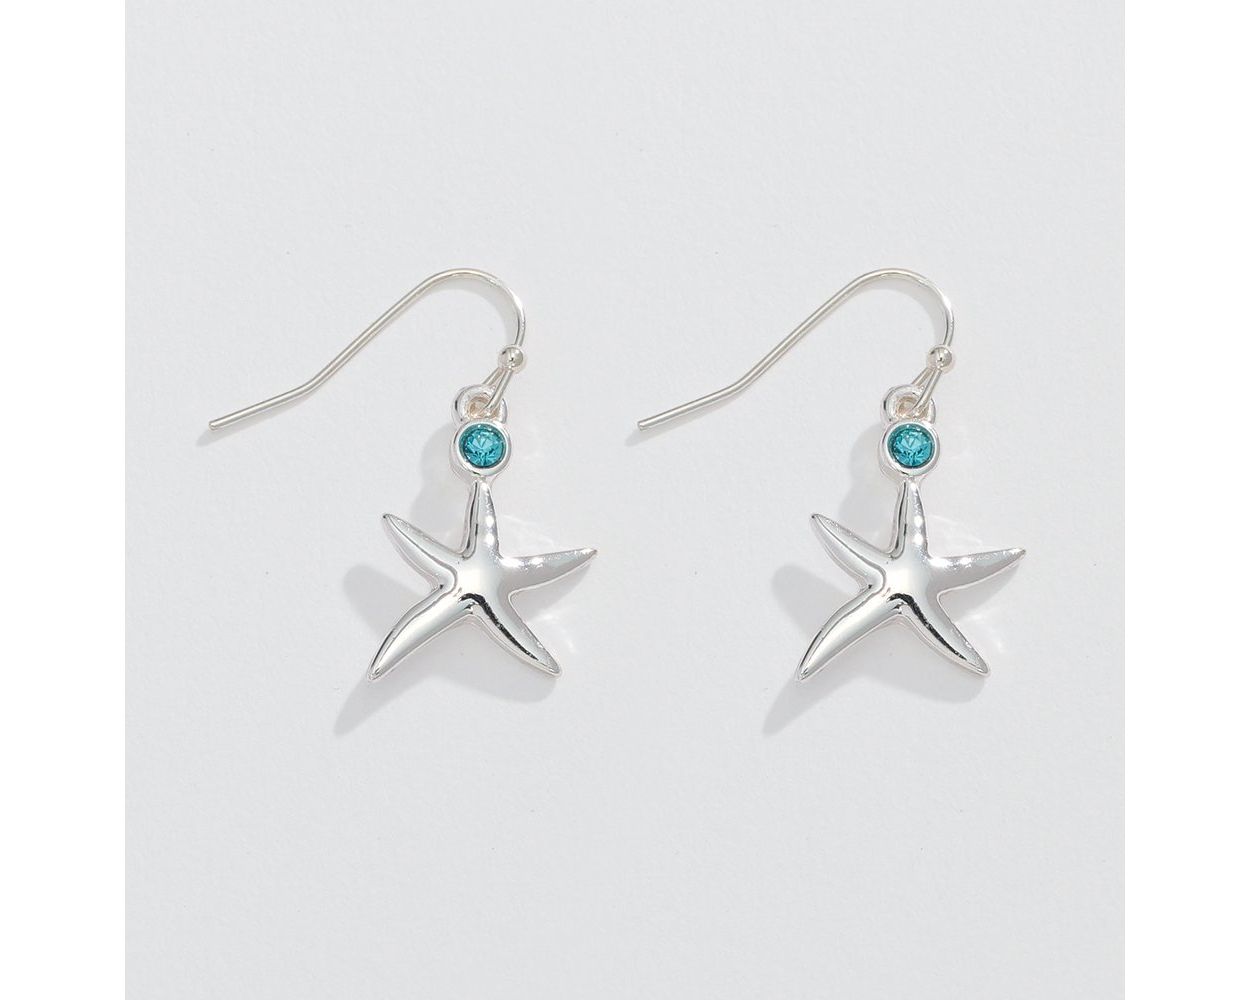 Silver Starfish with Crystals - Earrings - Mellow Monkey